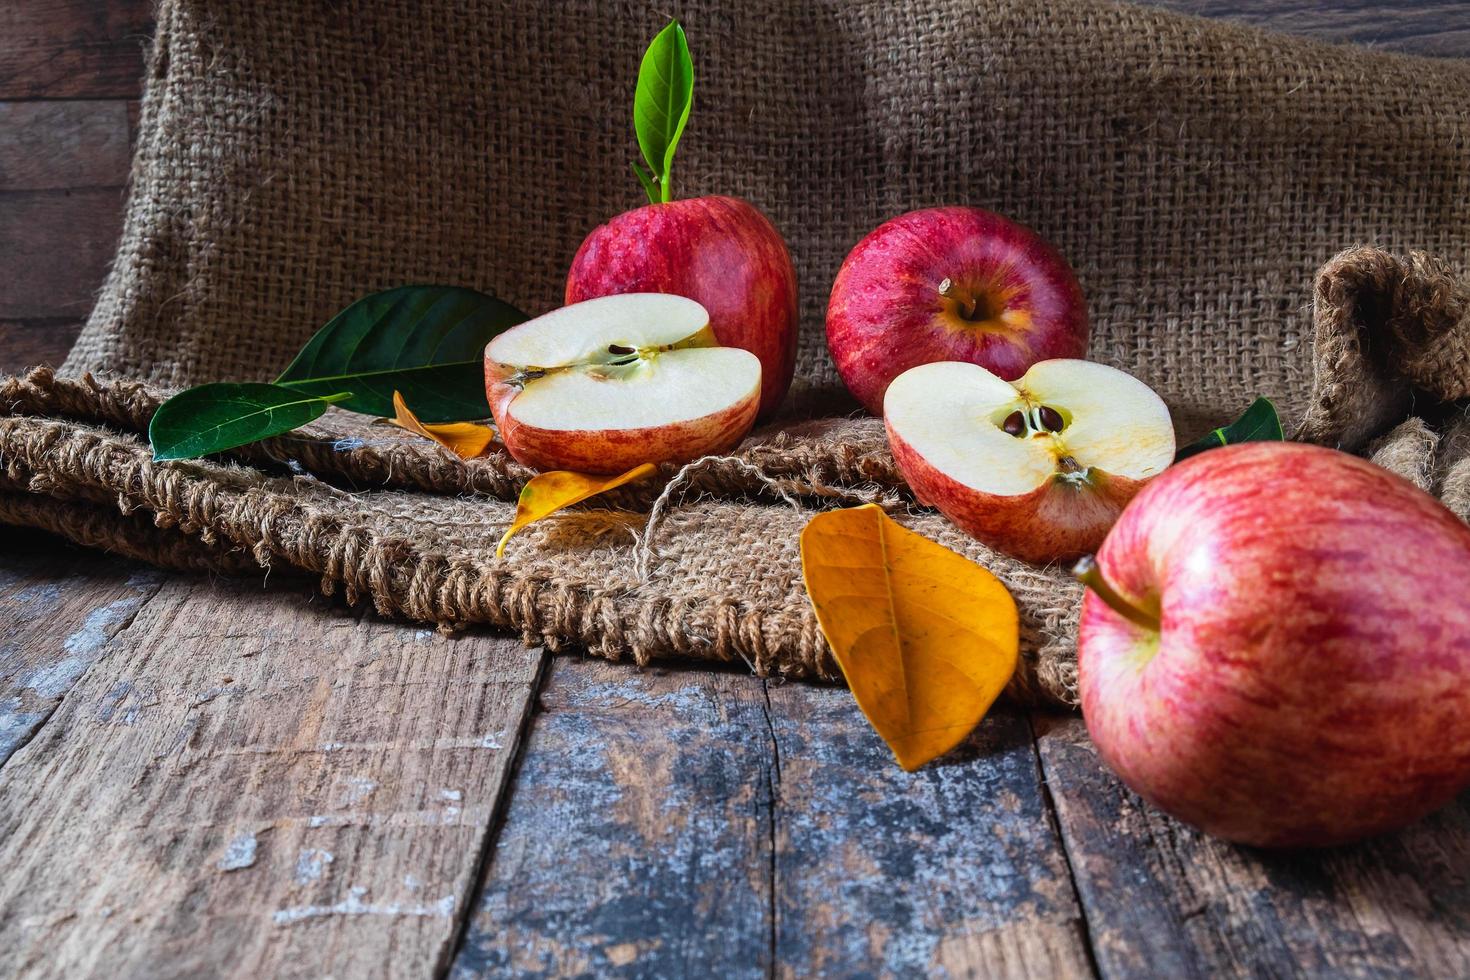 Red apples on a wooden table photo